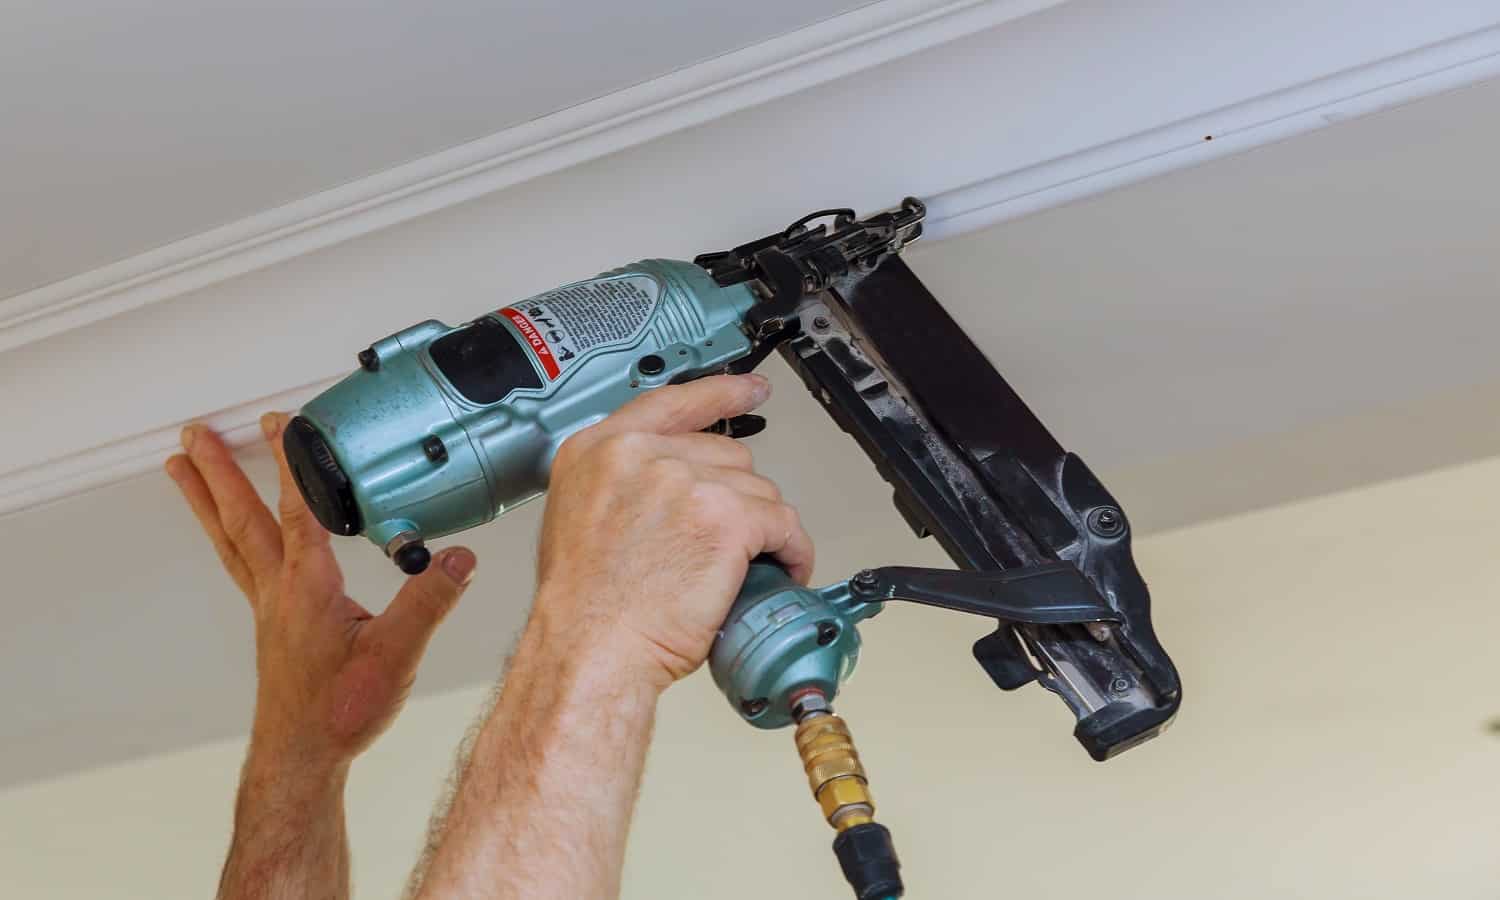 Carpenter brad using nail gun to Crown Moulding framing trim, with the warning label that all power tools have on them shown illustrating safety concept